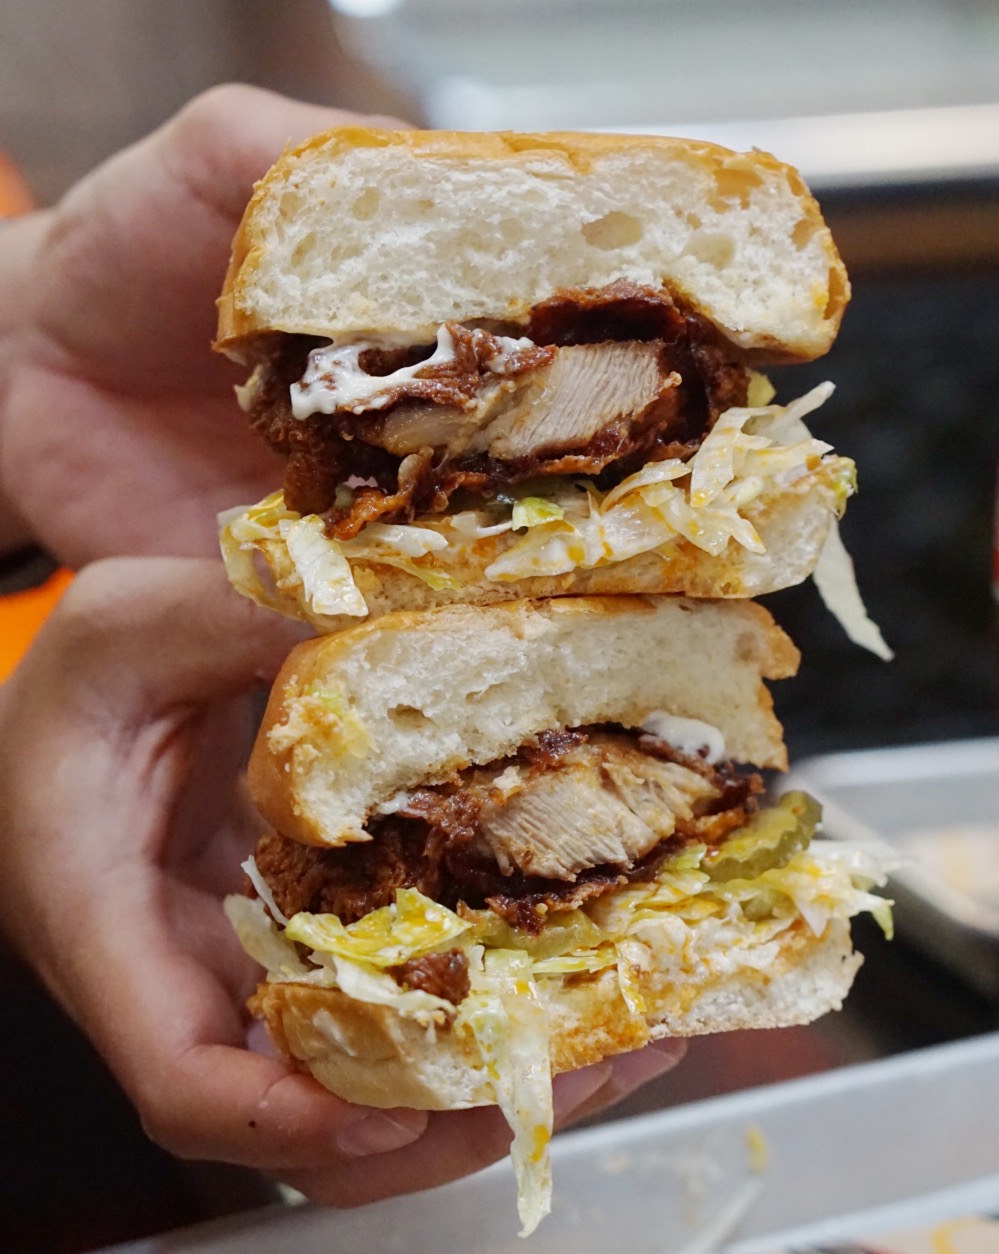 WesBurger 'N' More’s hot chicken sandwich debuted in 2014.